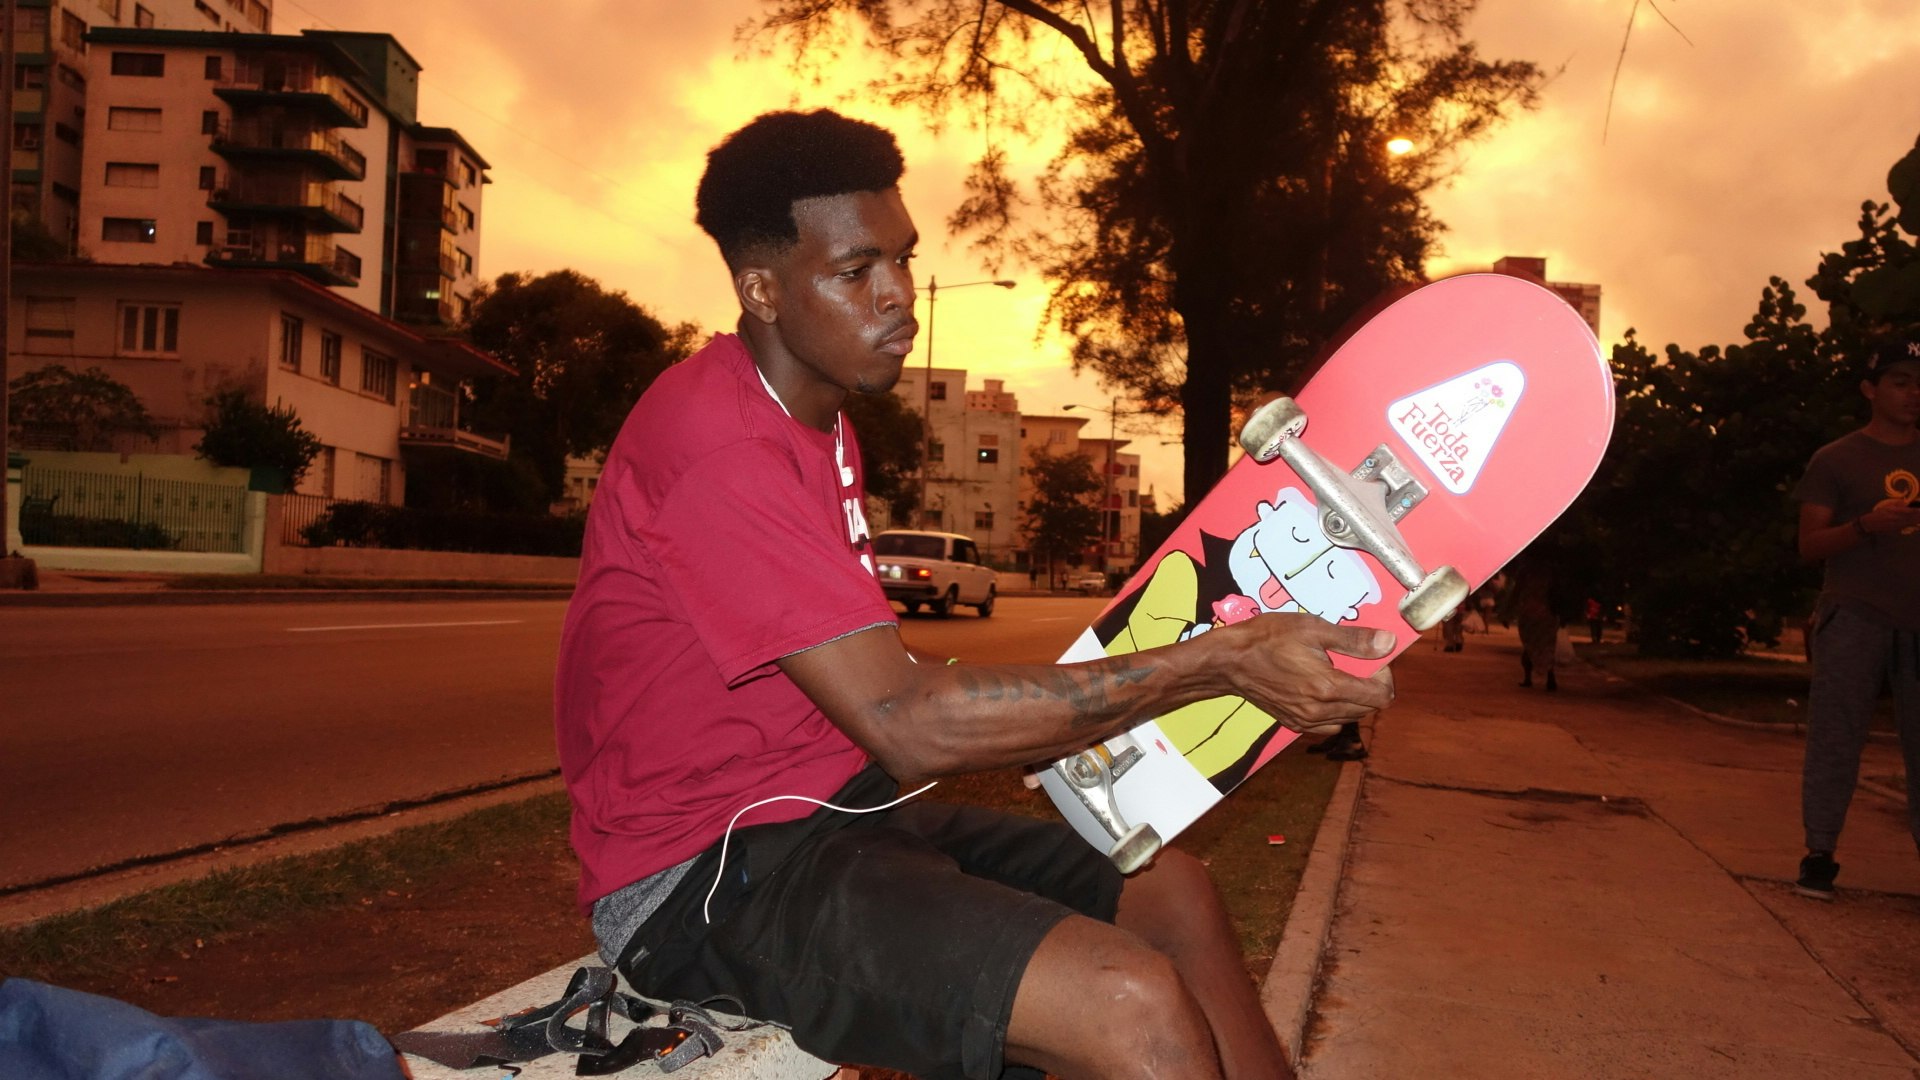 Cuba’s first skate team are ready to take on the world